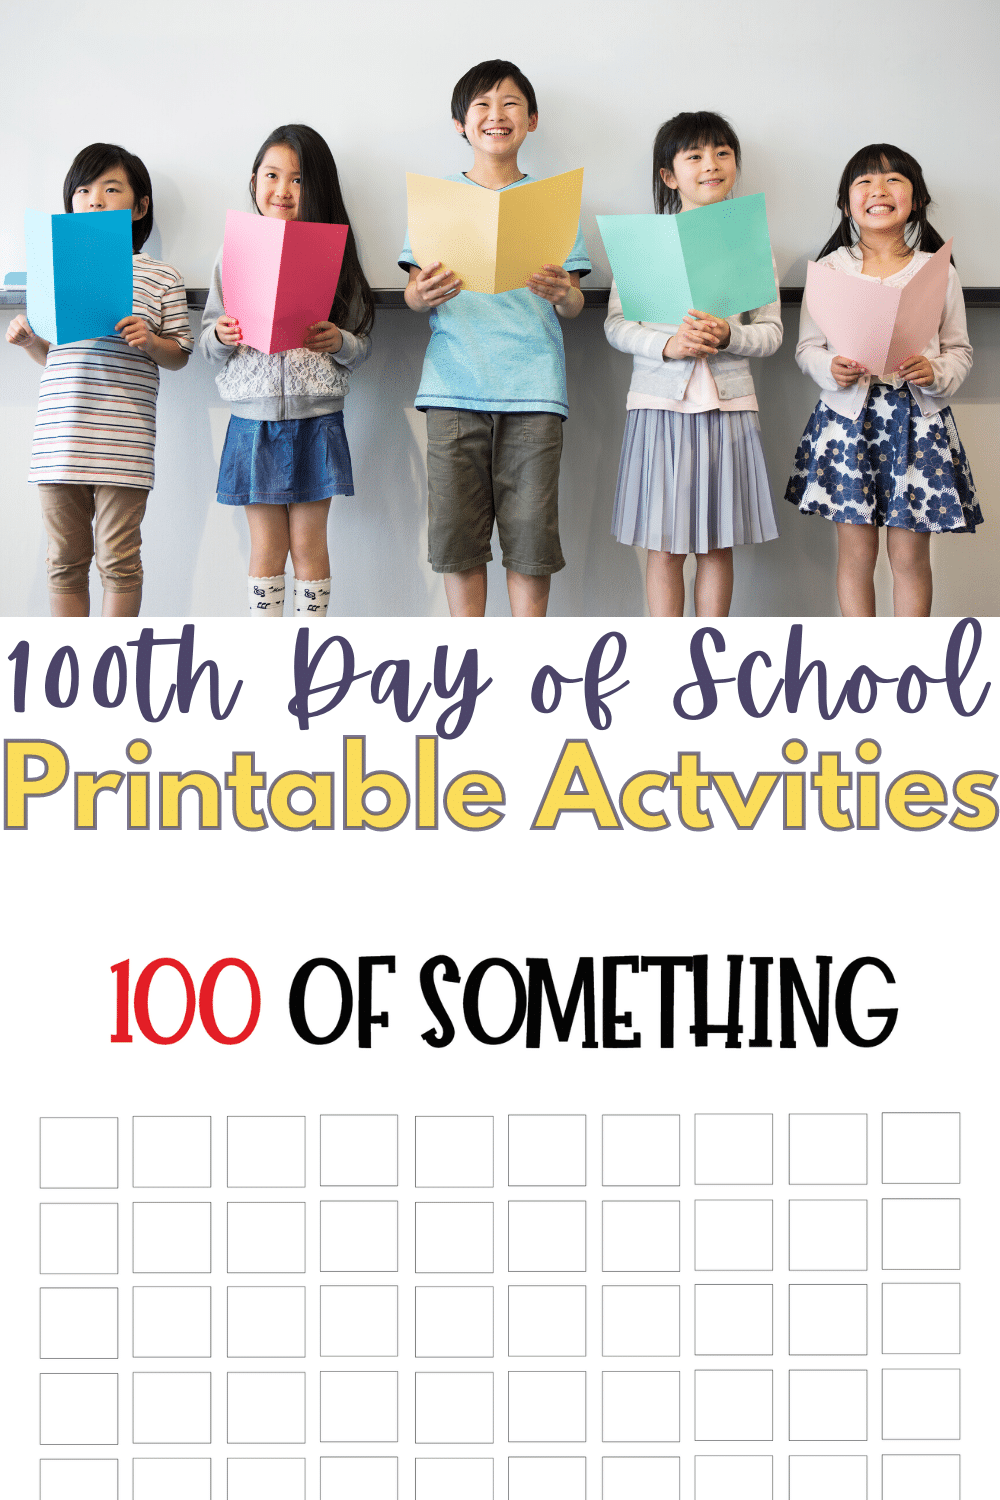 The kids will love these 100th Day of School Printables! With the 100 days of school coming up soon, these fun school printables are free! #100thdayofschool #freeprintable #school #100days via @wondermomwannab